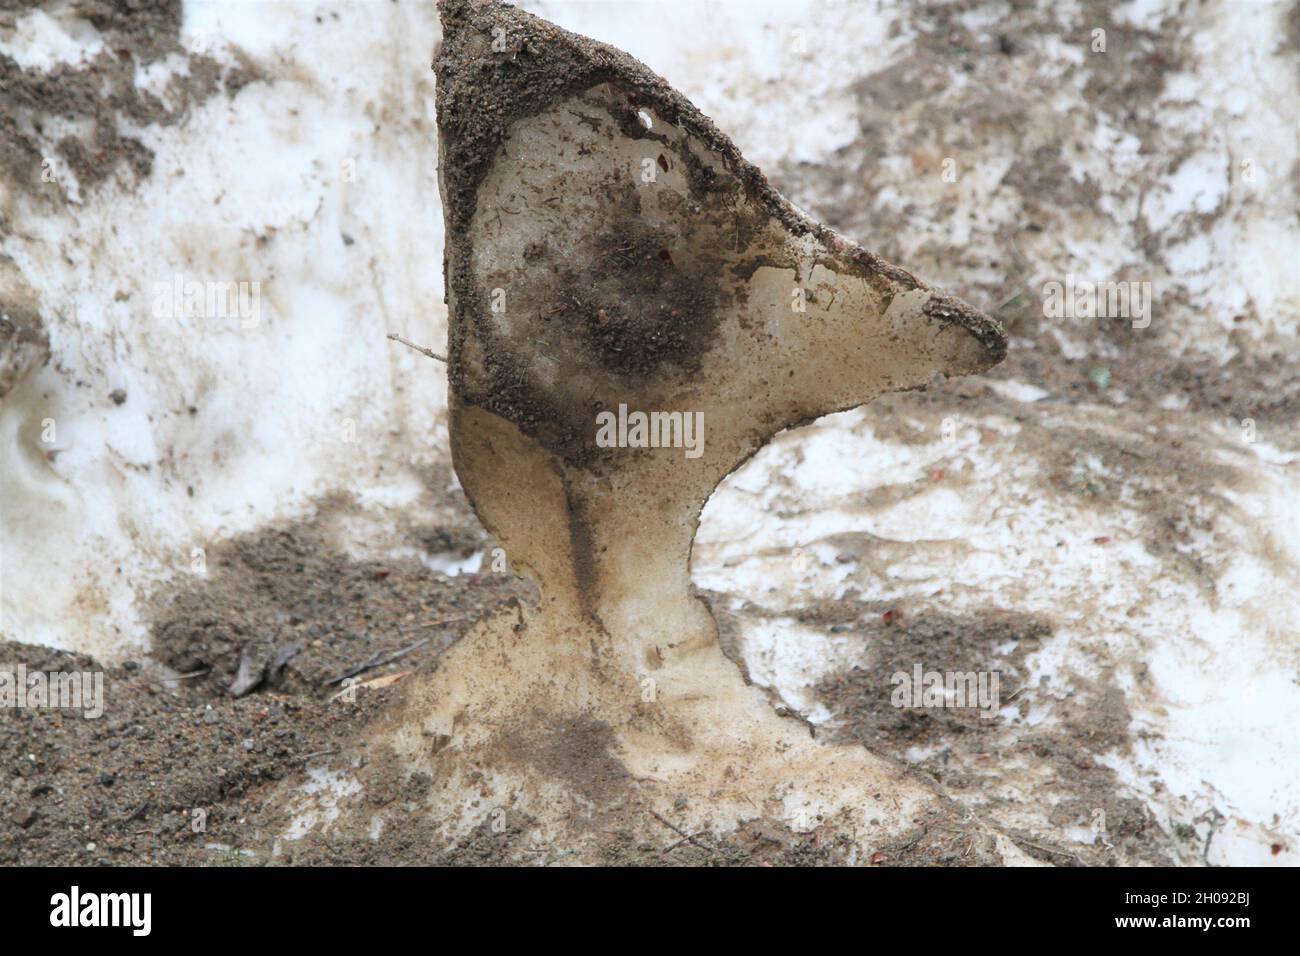 Ice and sand statue in form of animal head Stock Photo